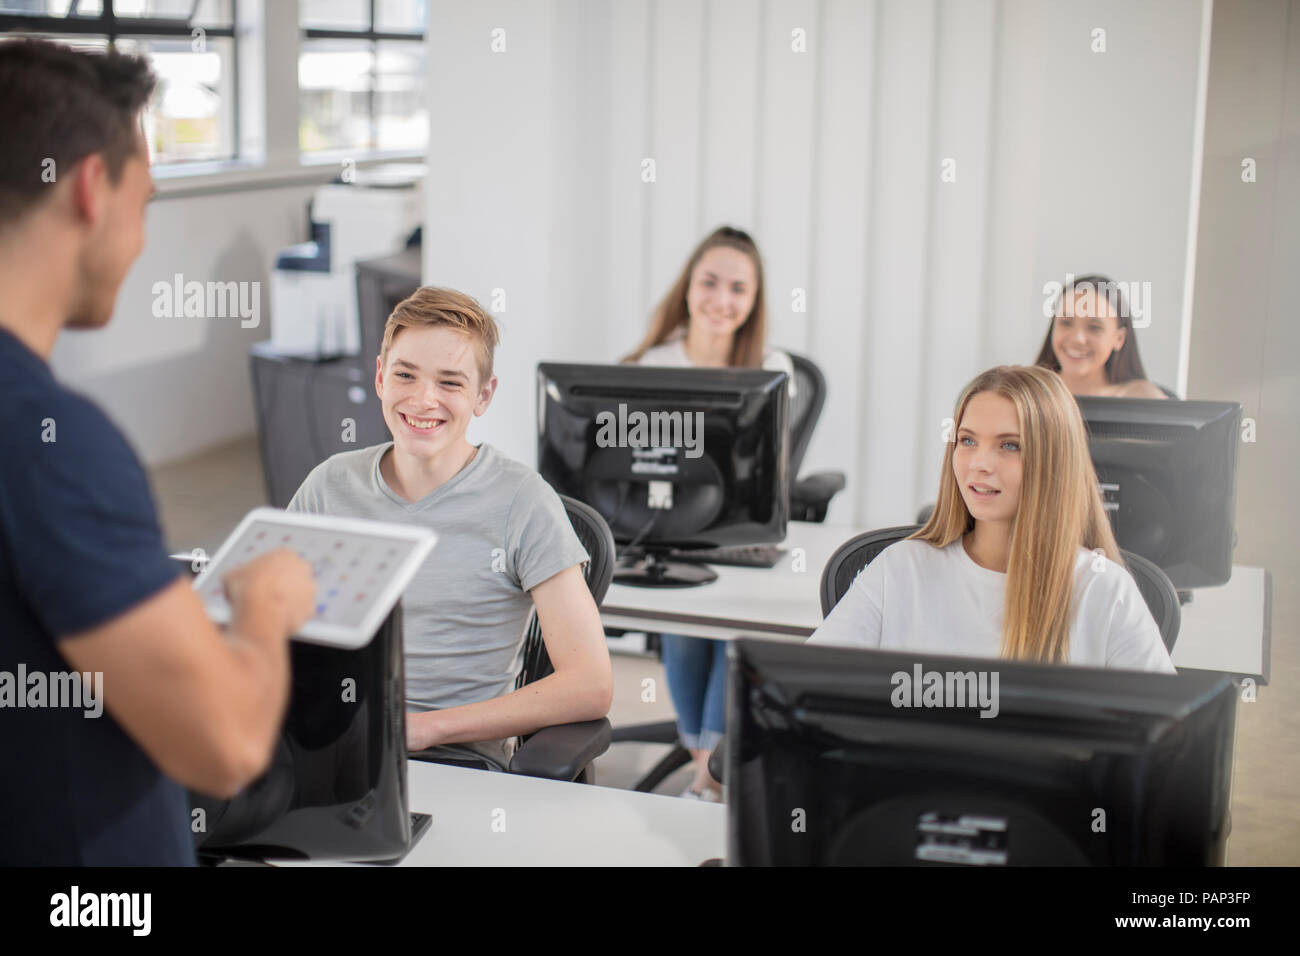 Teacher talking to students in computer class Stock Photo